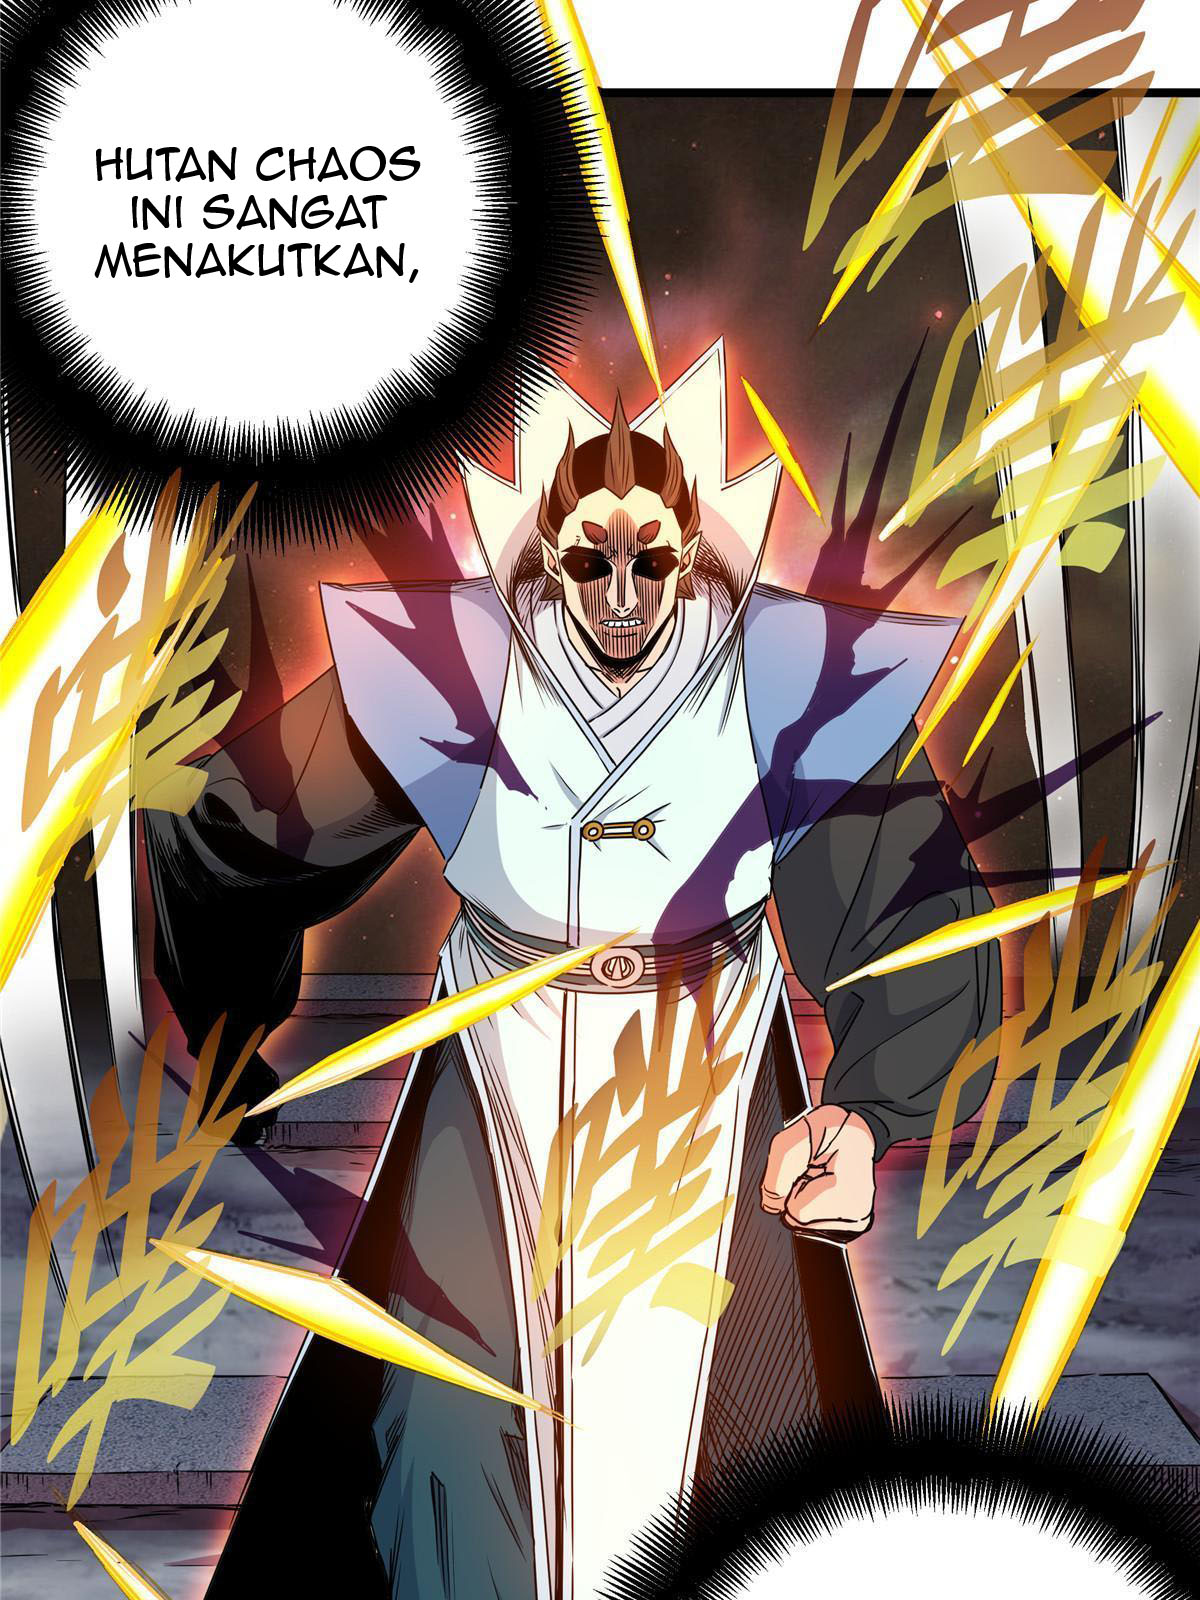 Emperor Domination Chapter 14